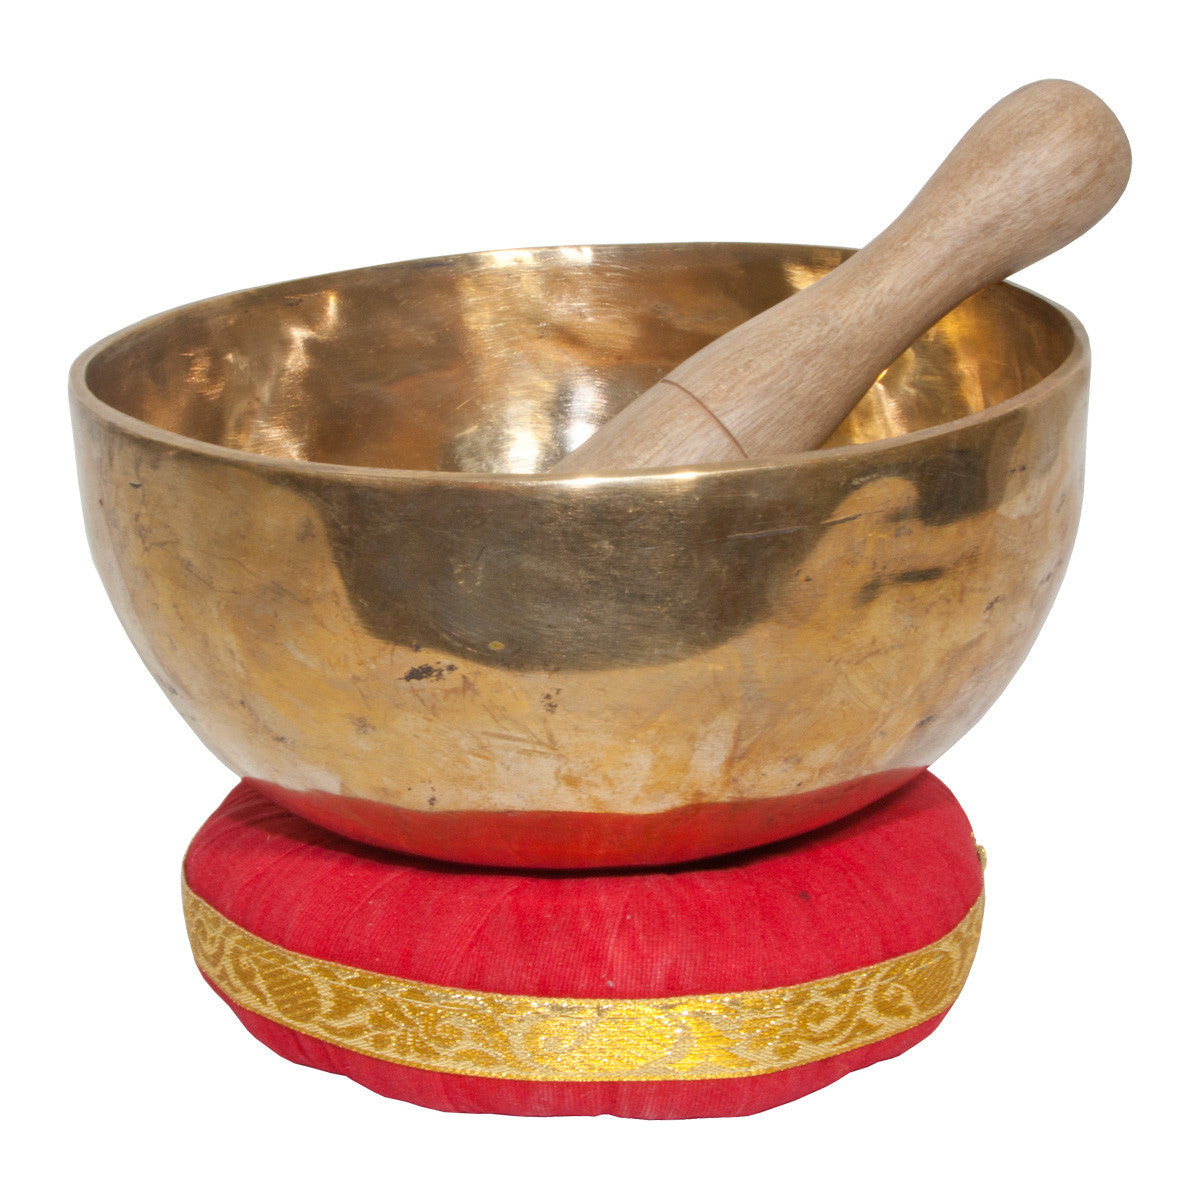 Singing Bowl with Rest and Beater